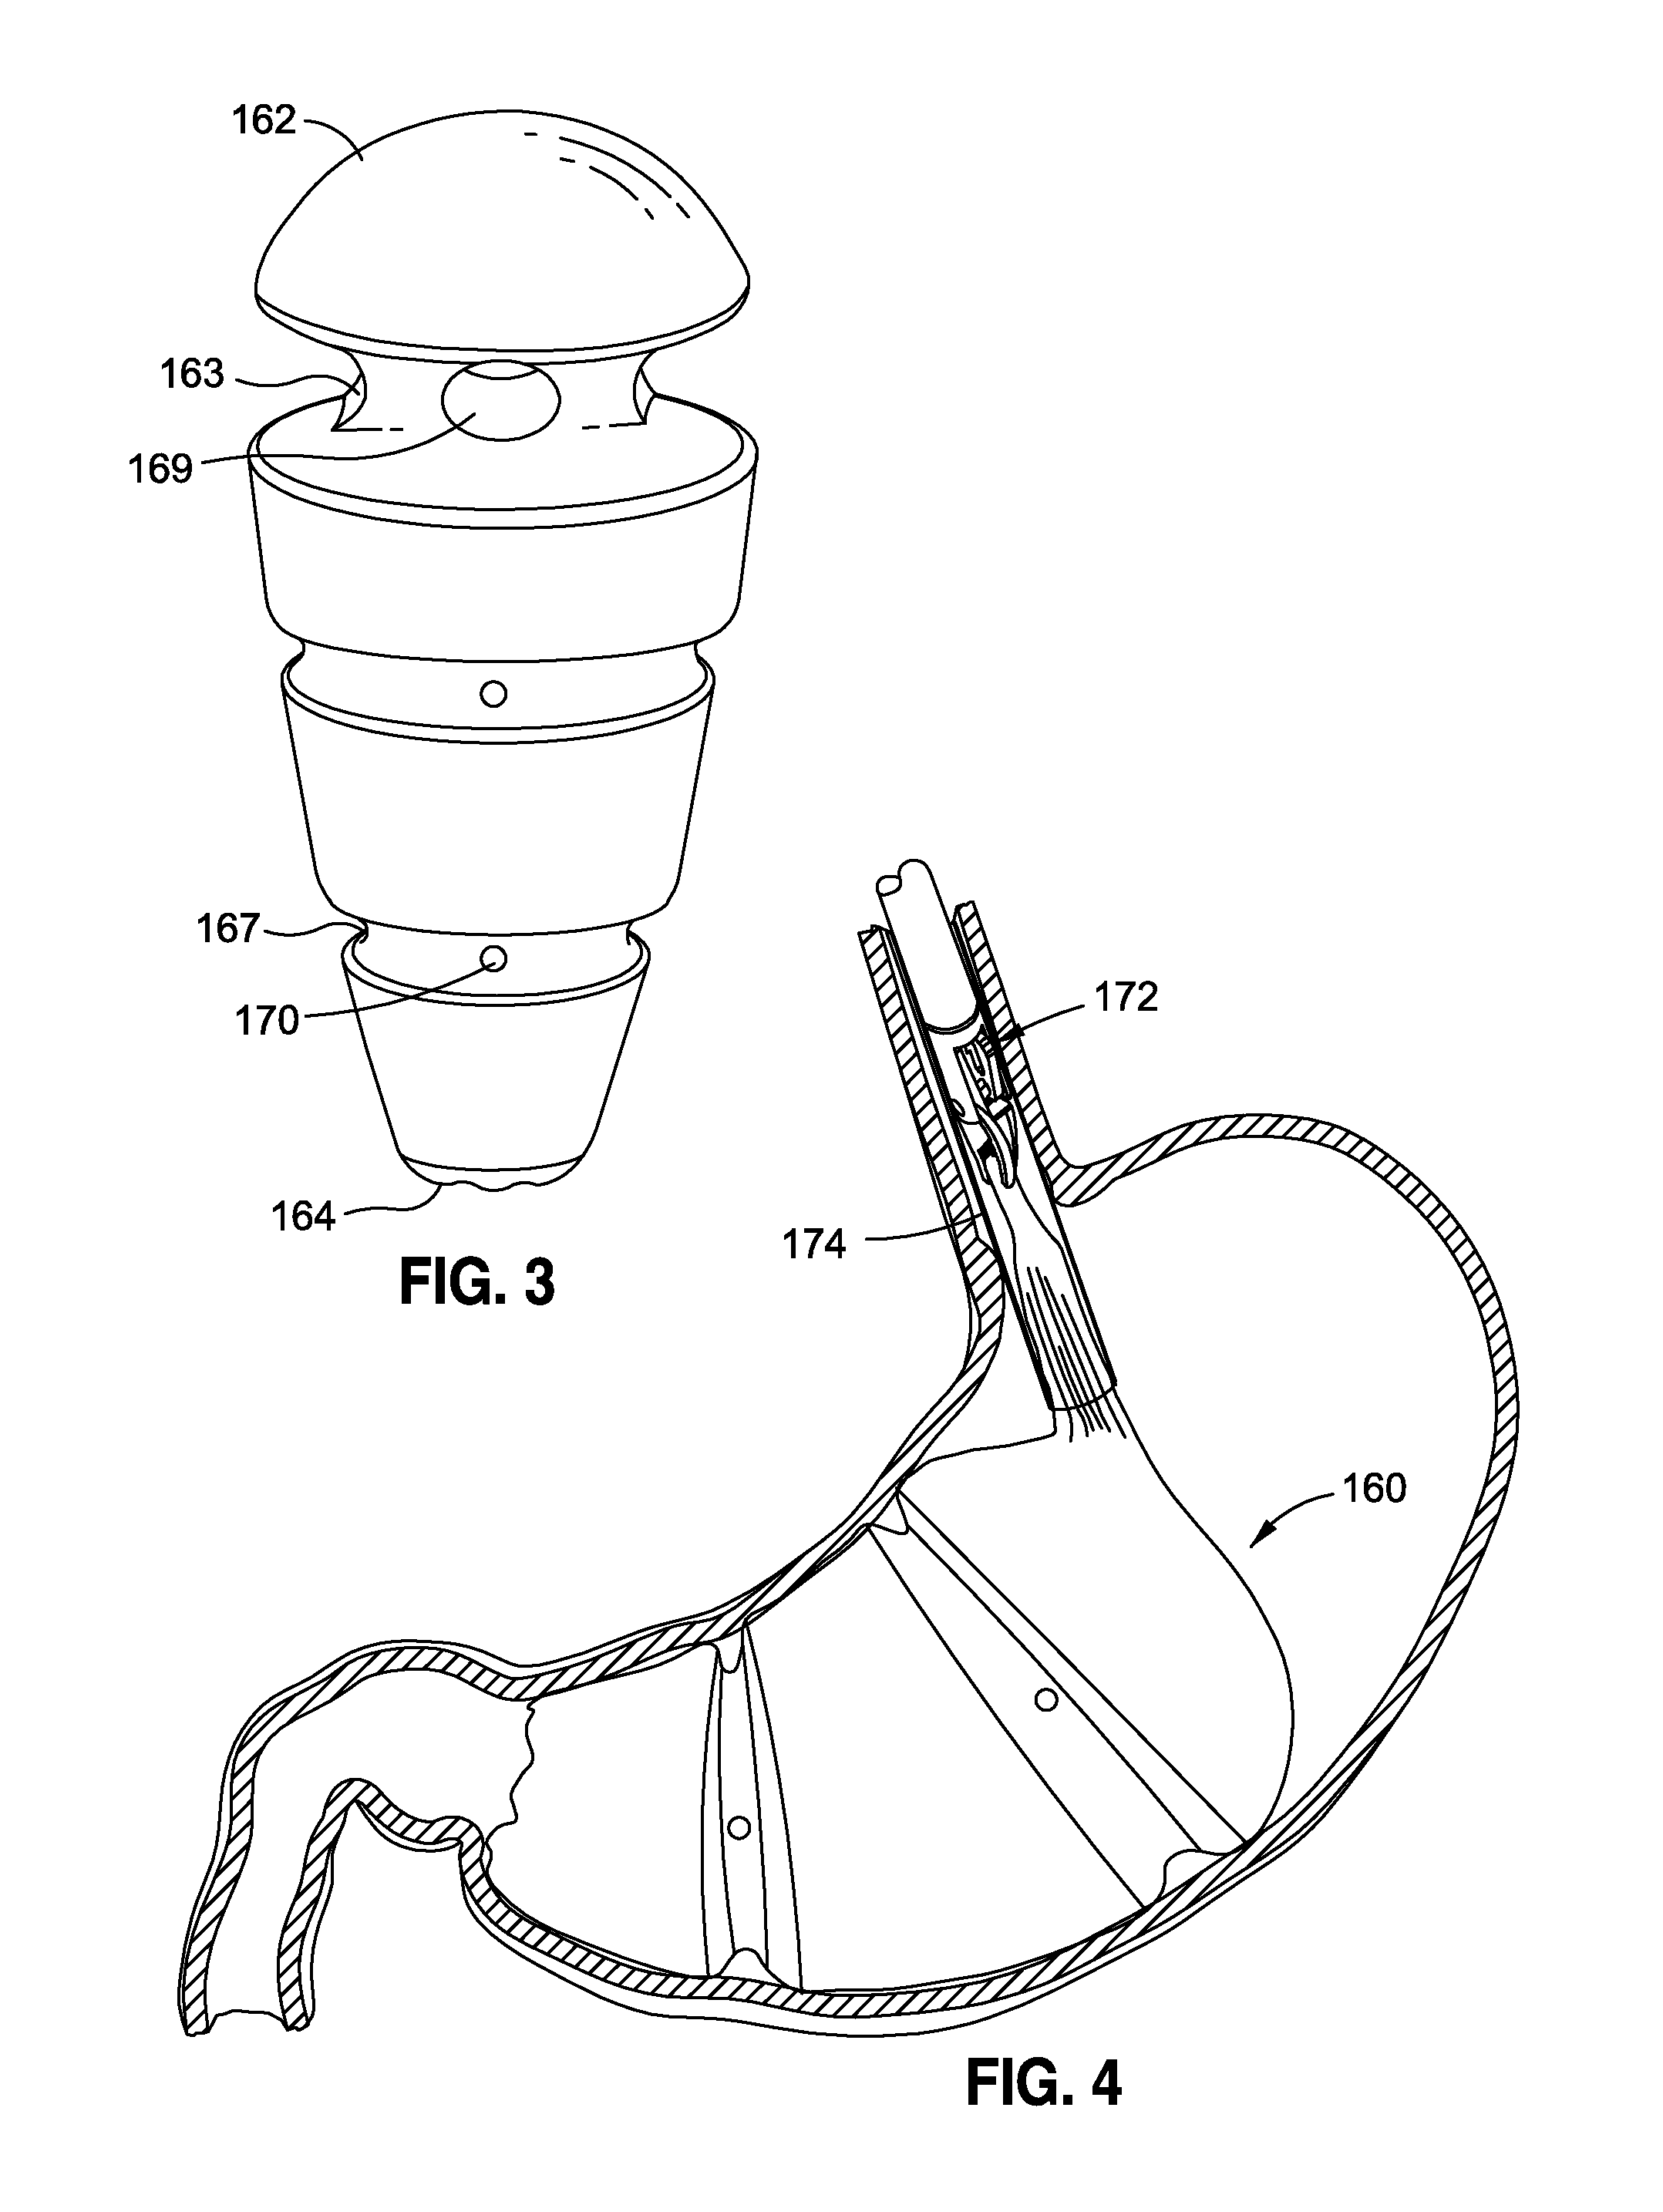 Space-filling intragastric implants with fluid flow